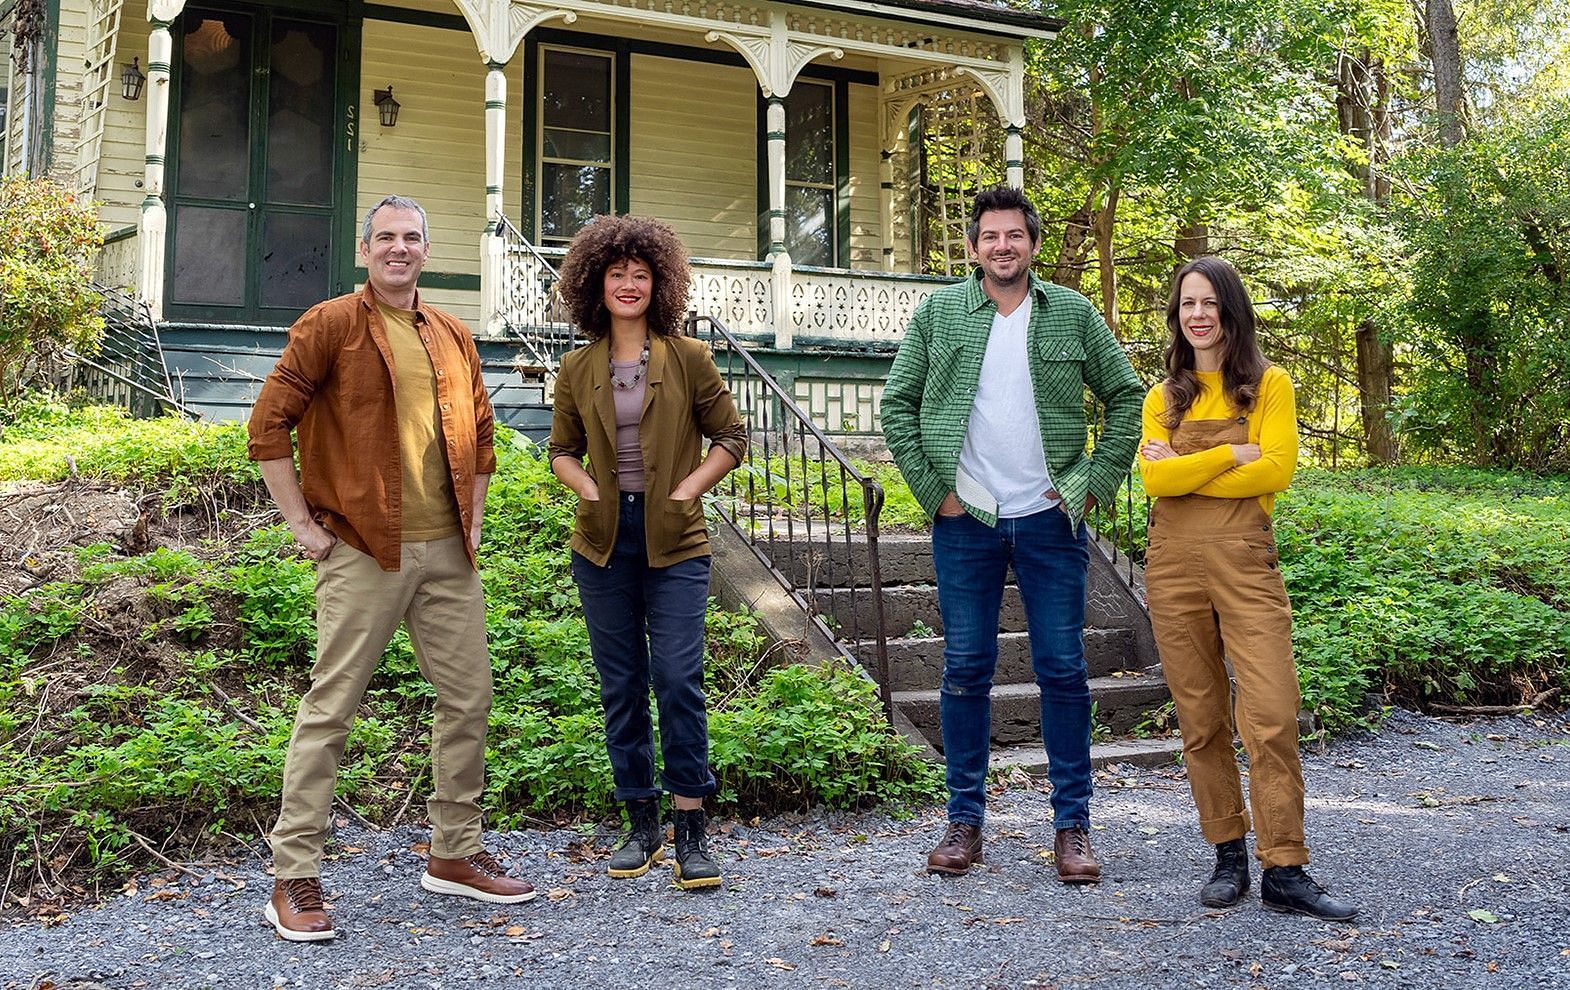 The cast of Who&rsquo;s Afraid of a Cheap Old House (Image via HGTV)